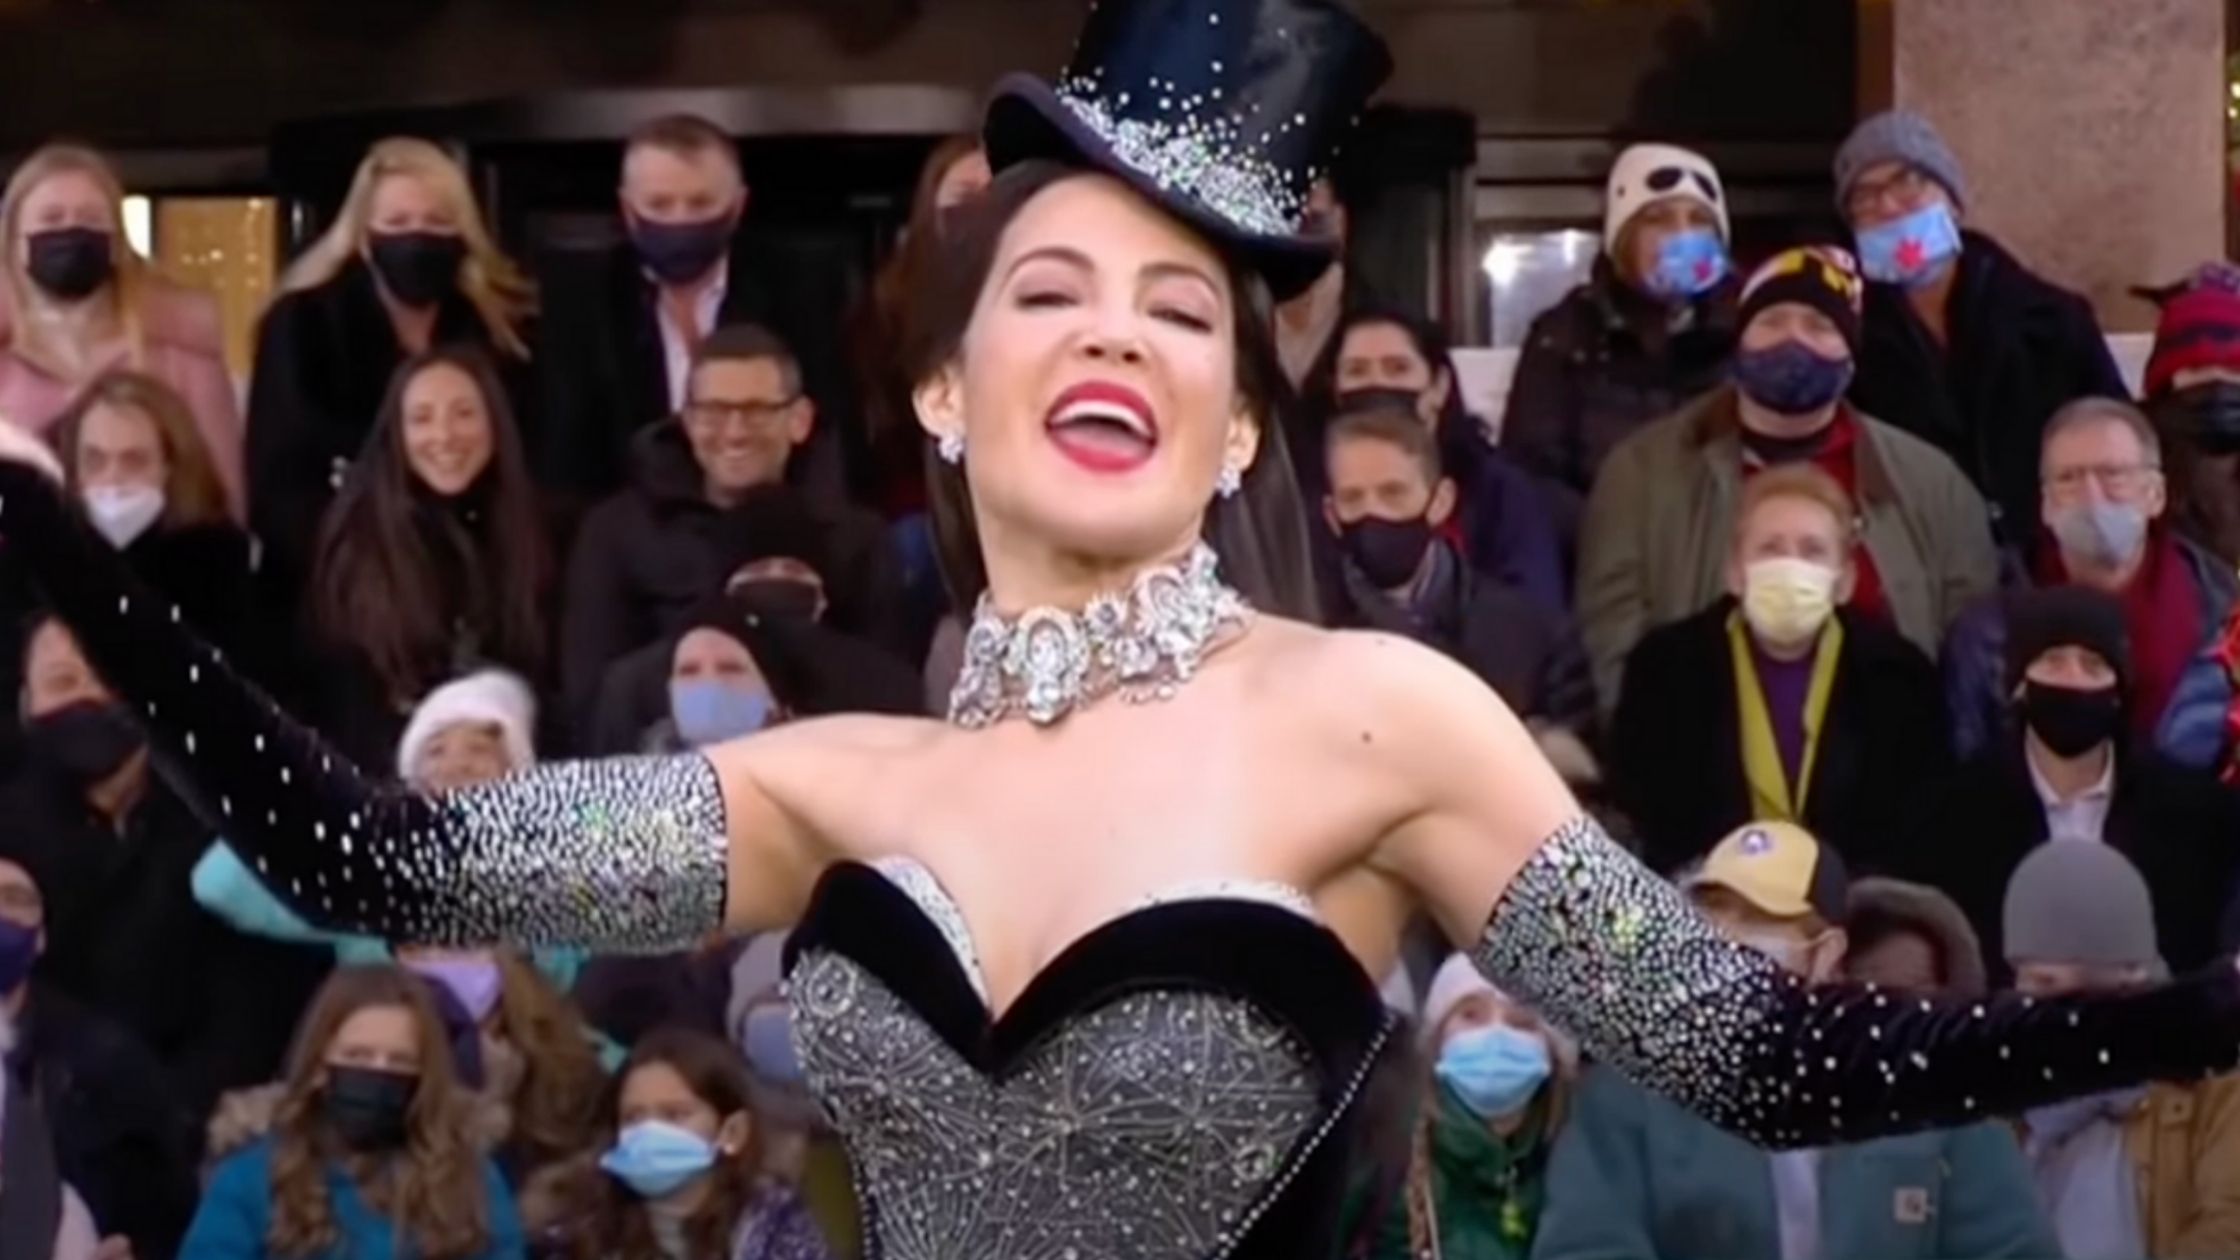 WATCH: ‘Six’, ‘Wicked’, ‘Moulin Rouge’, and More Performances from the Macy’s Thanksgiving Day Parade